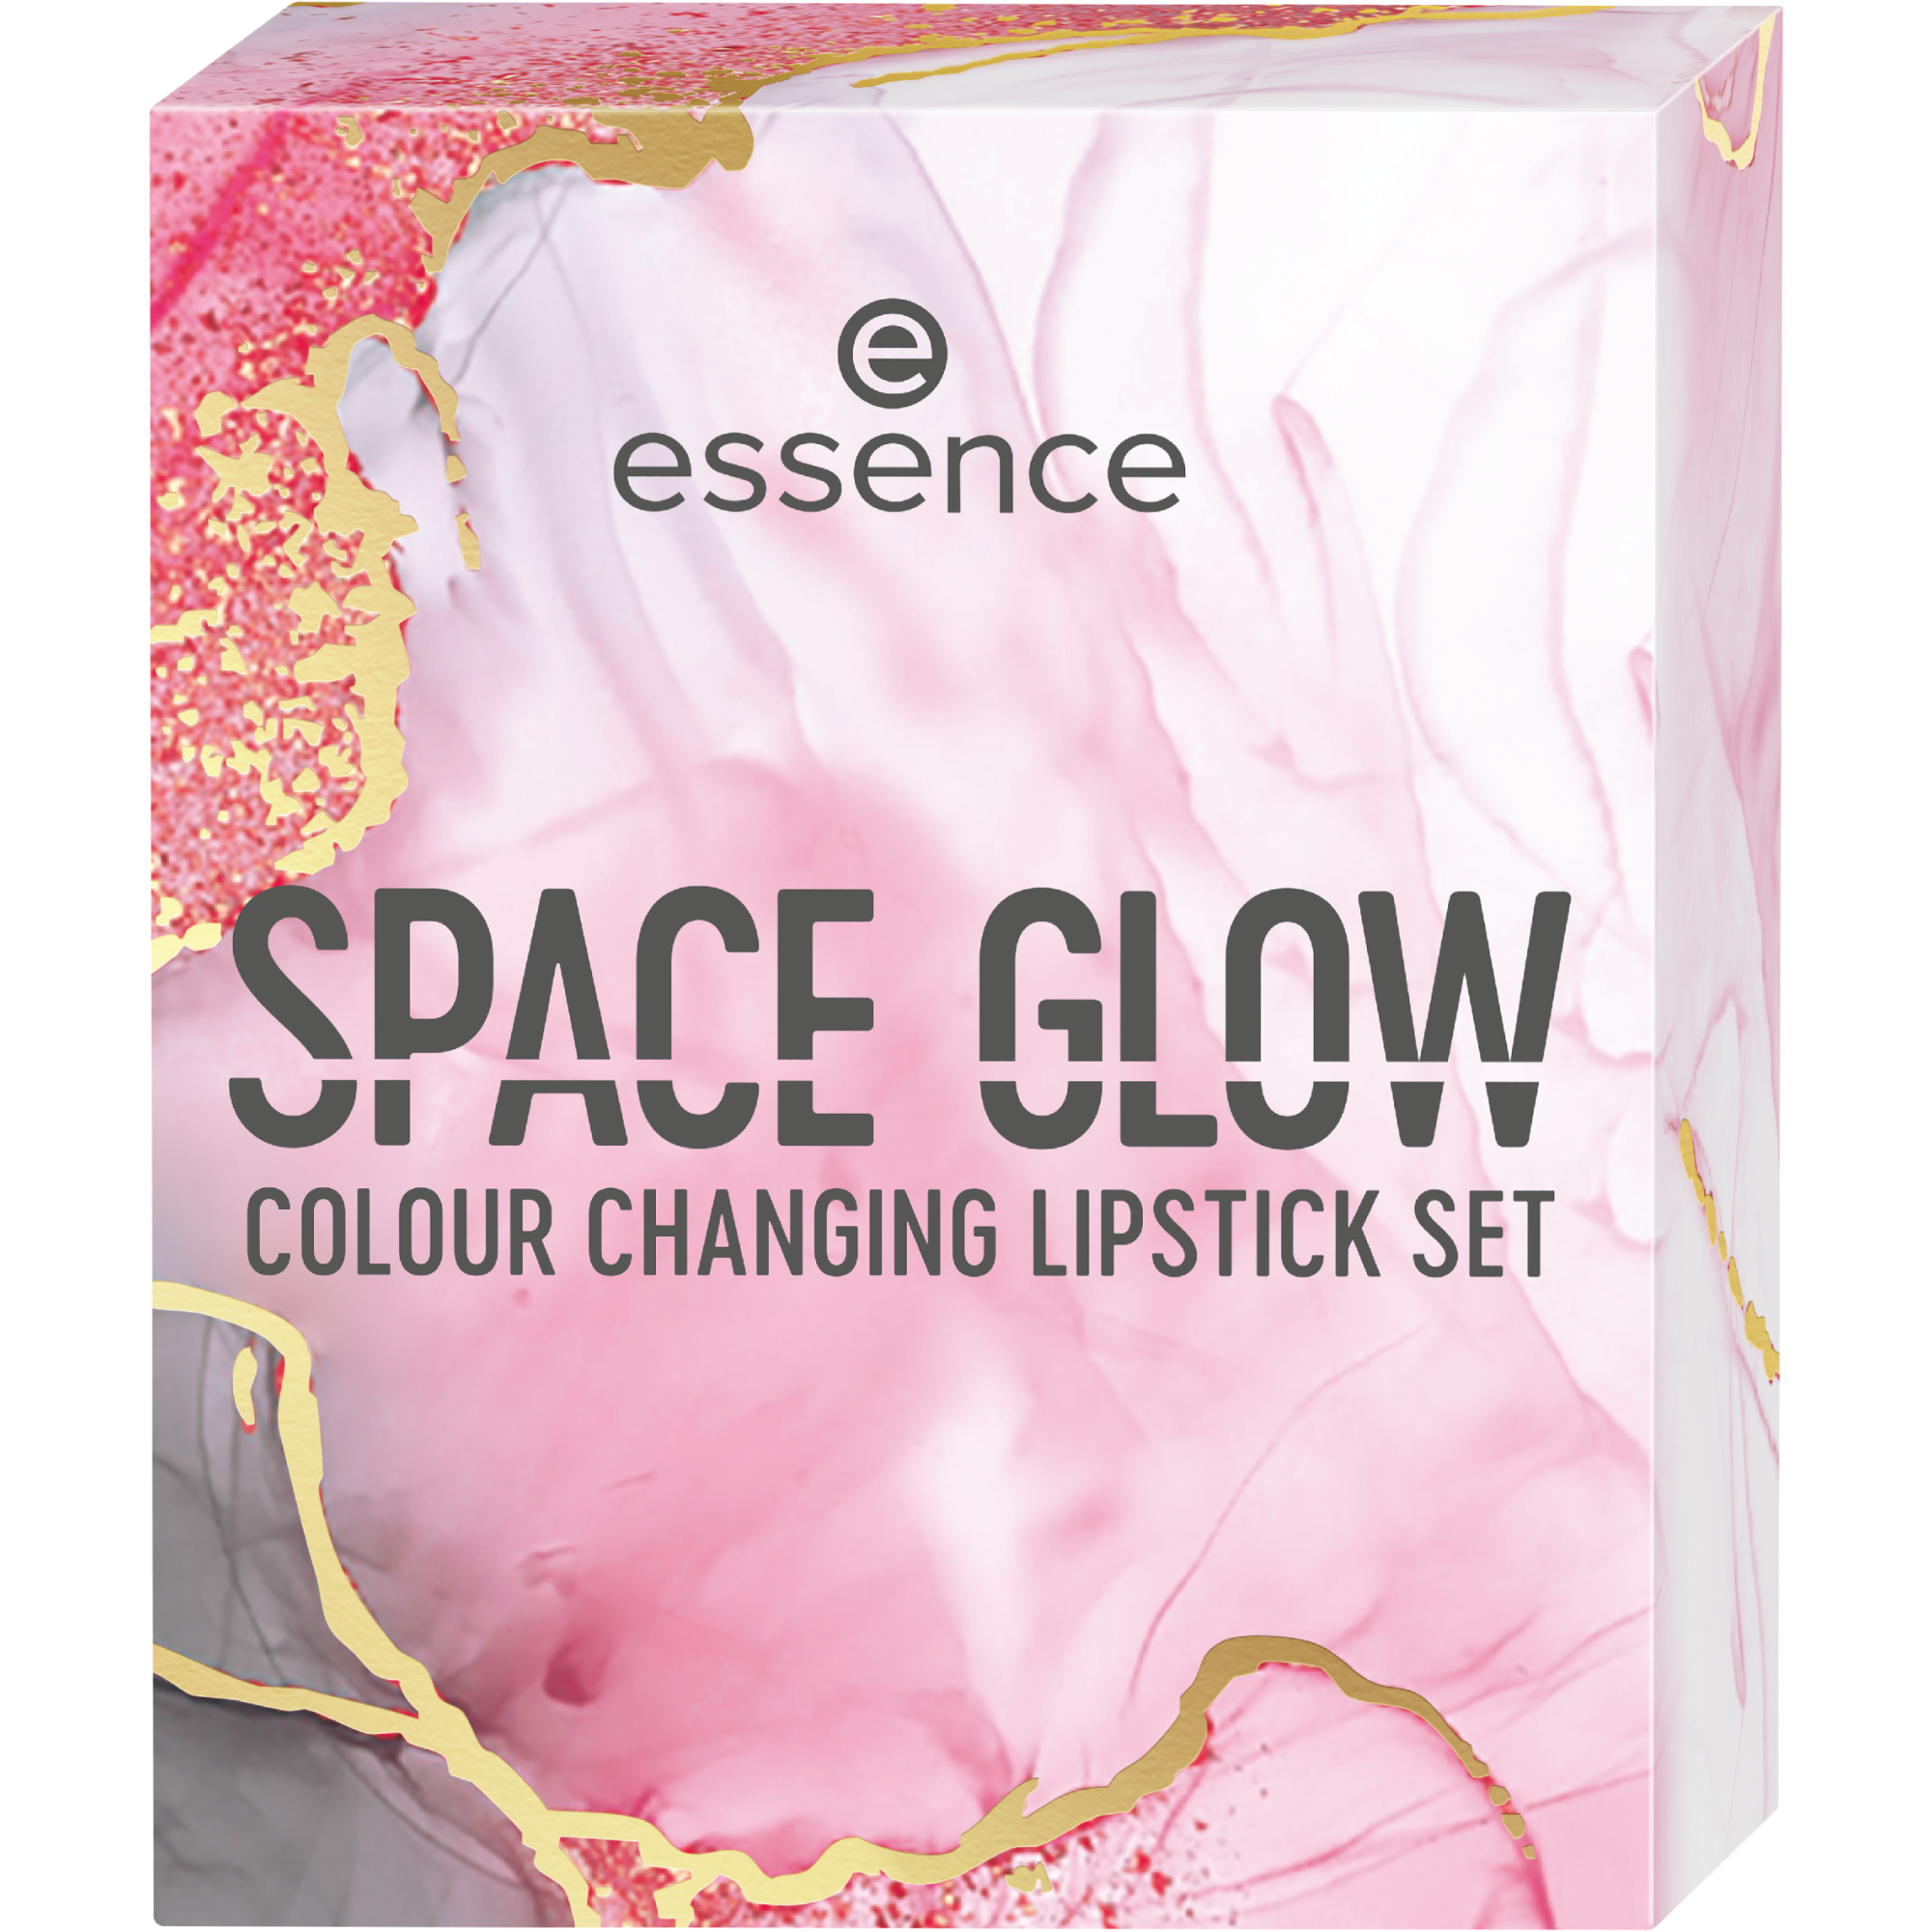 SPACE GLOW COLOUR CHANGING LIPSTICK SET